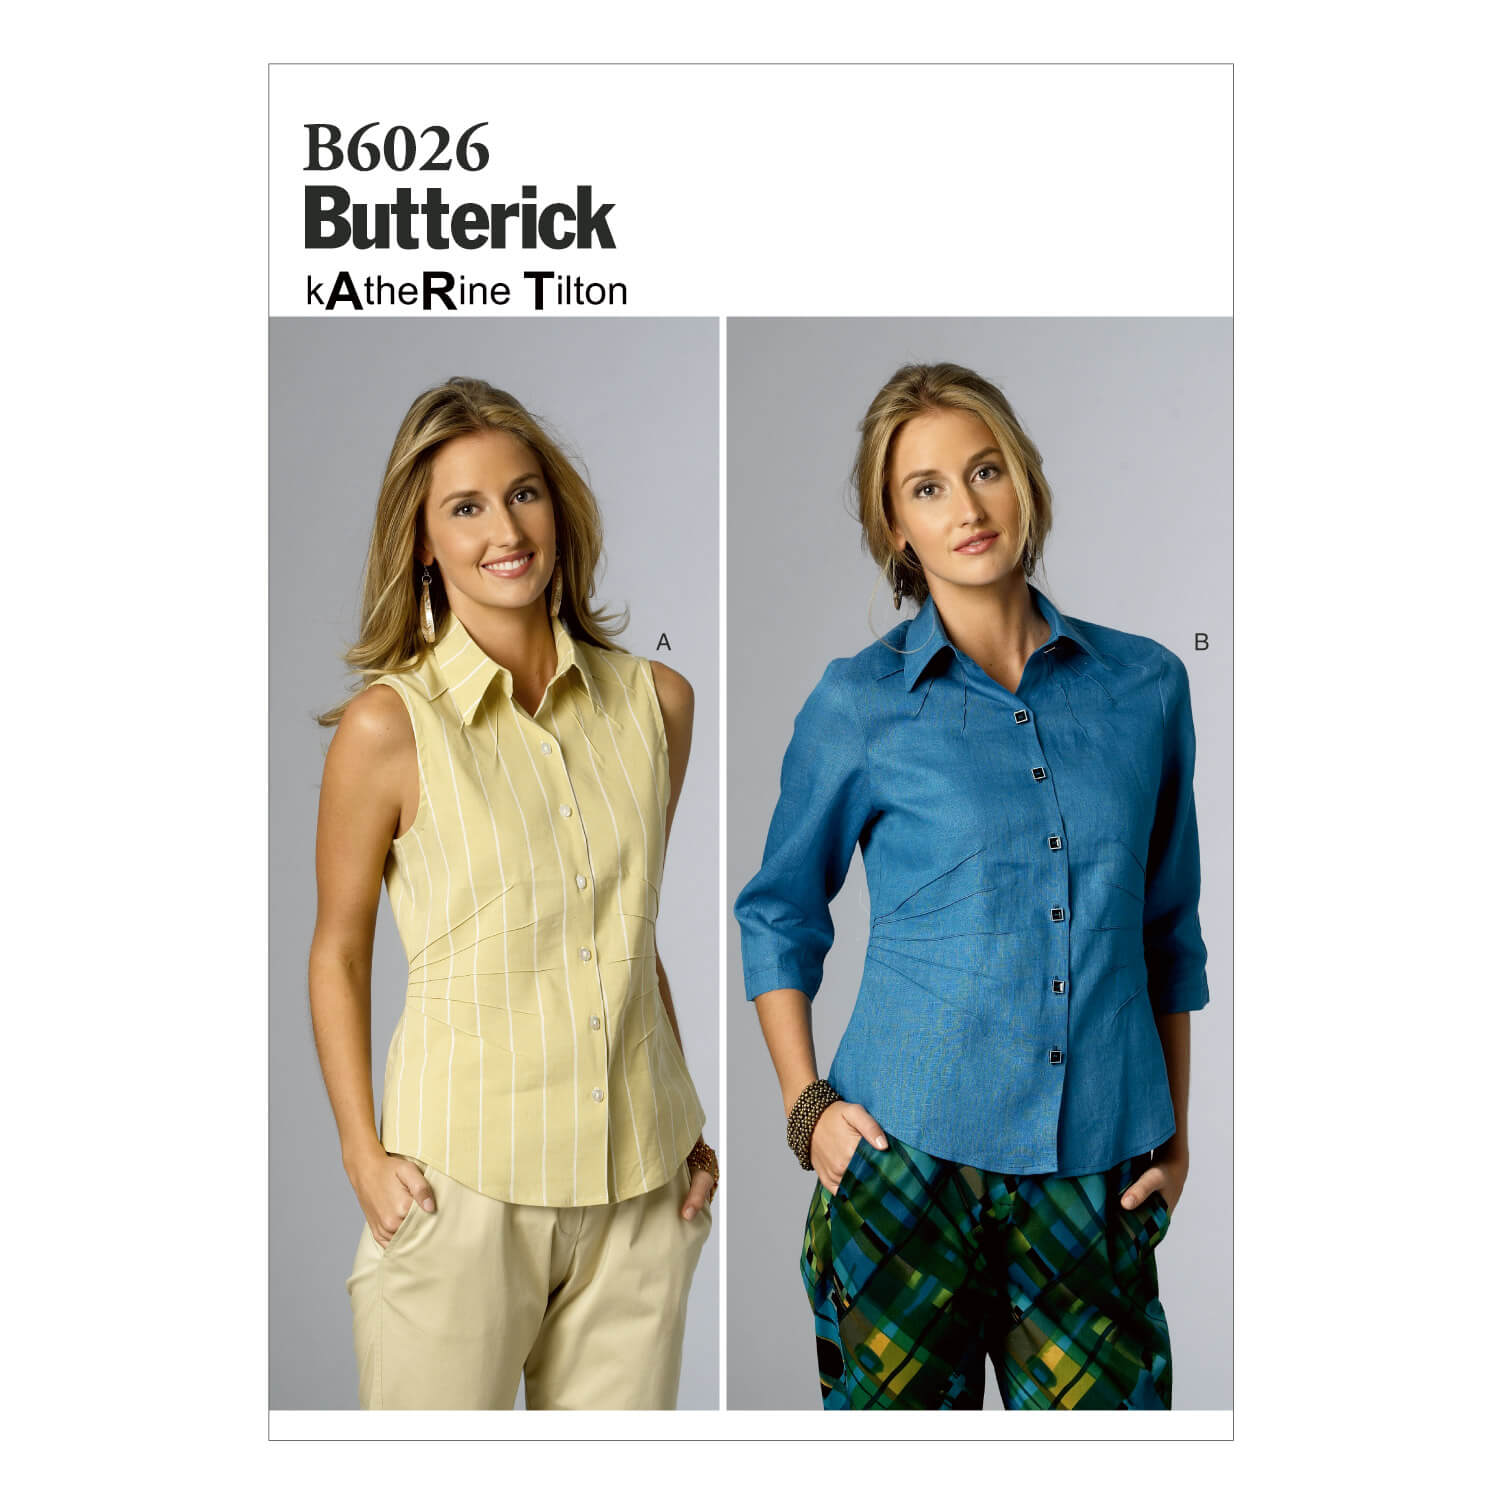 Butterick Sewing Pattern B6026 Misses' Top